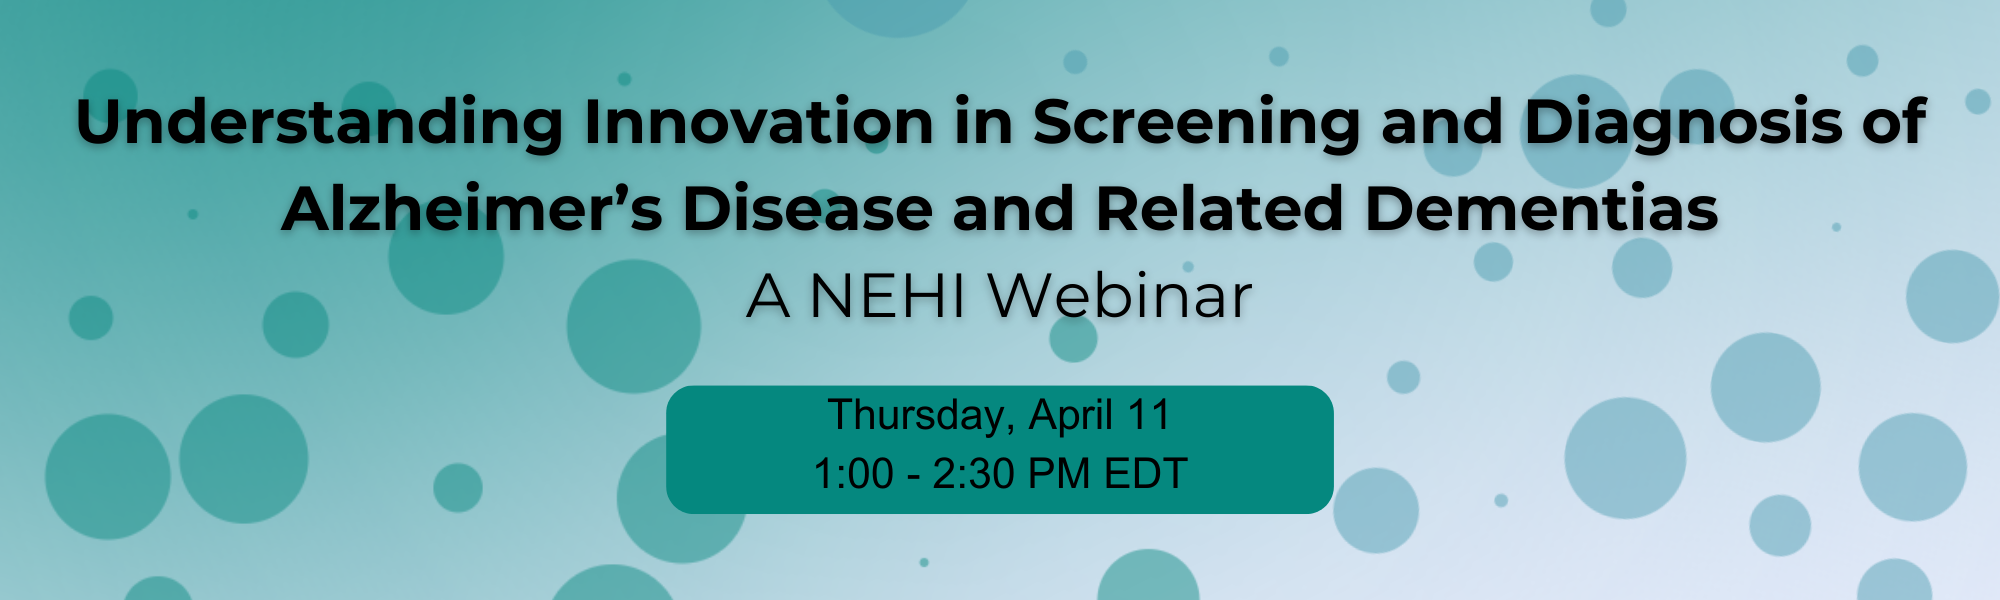 Understanding Innovation in Screening and Diagnosis of Alzheimer’s Disease and Related Dementias